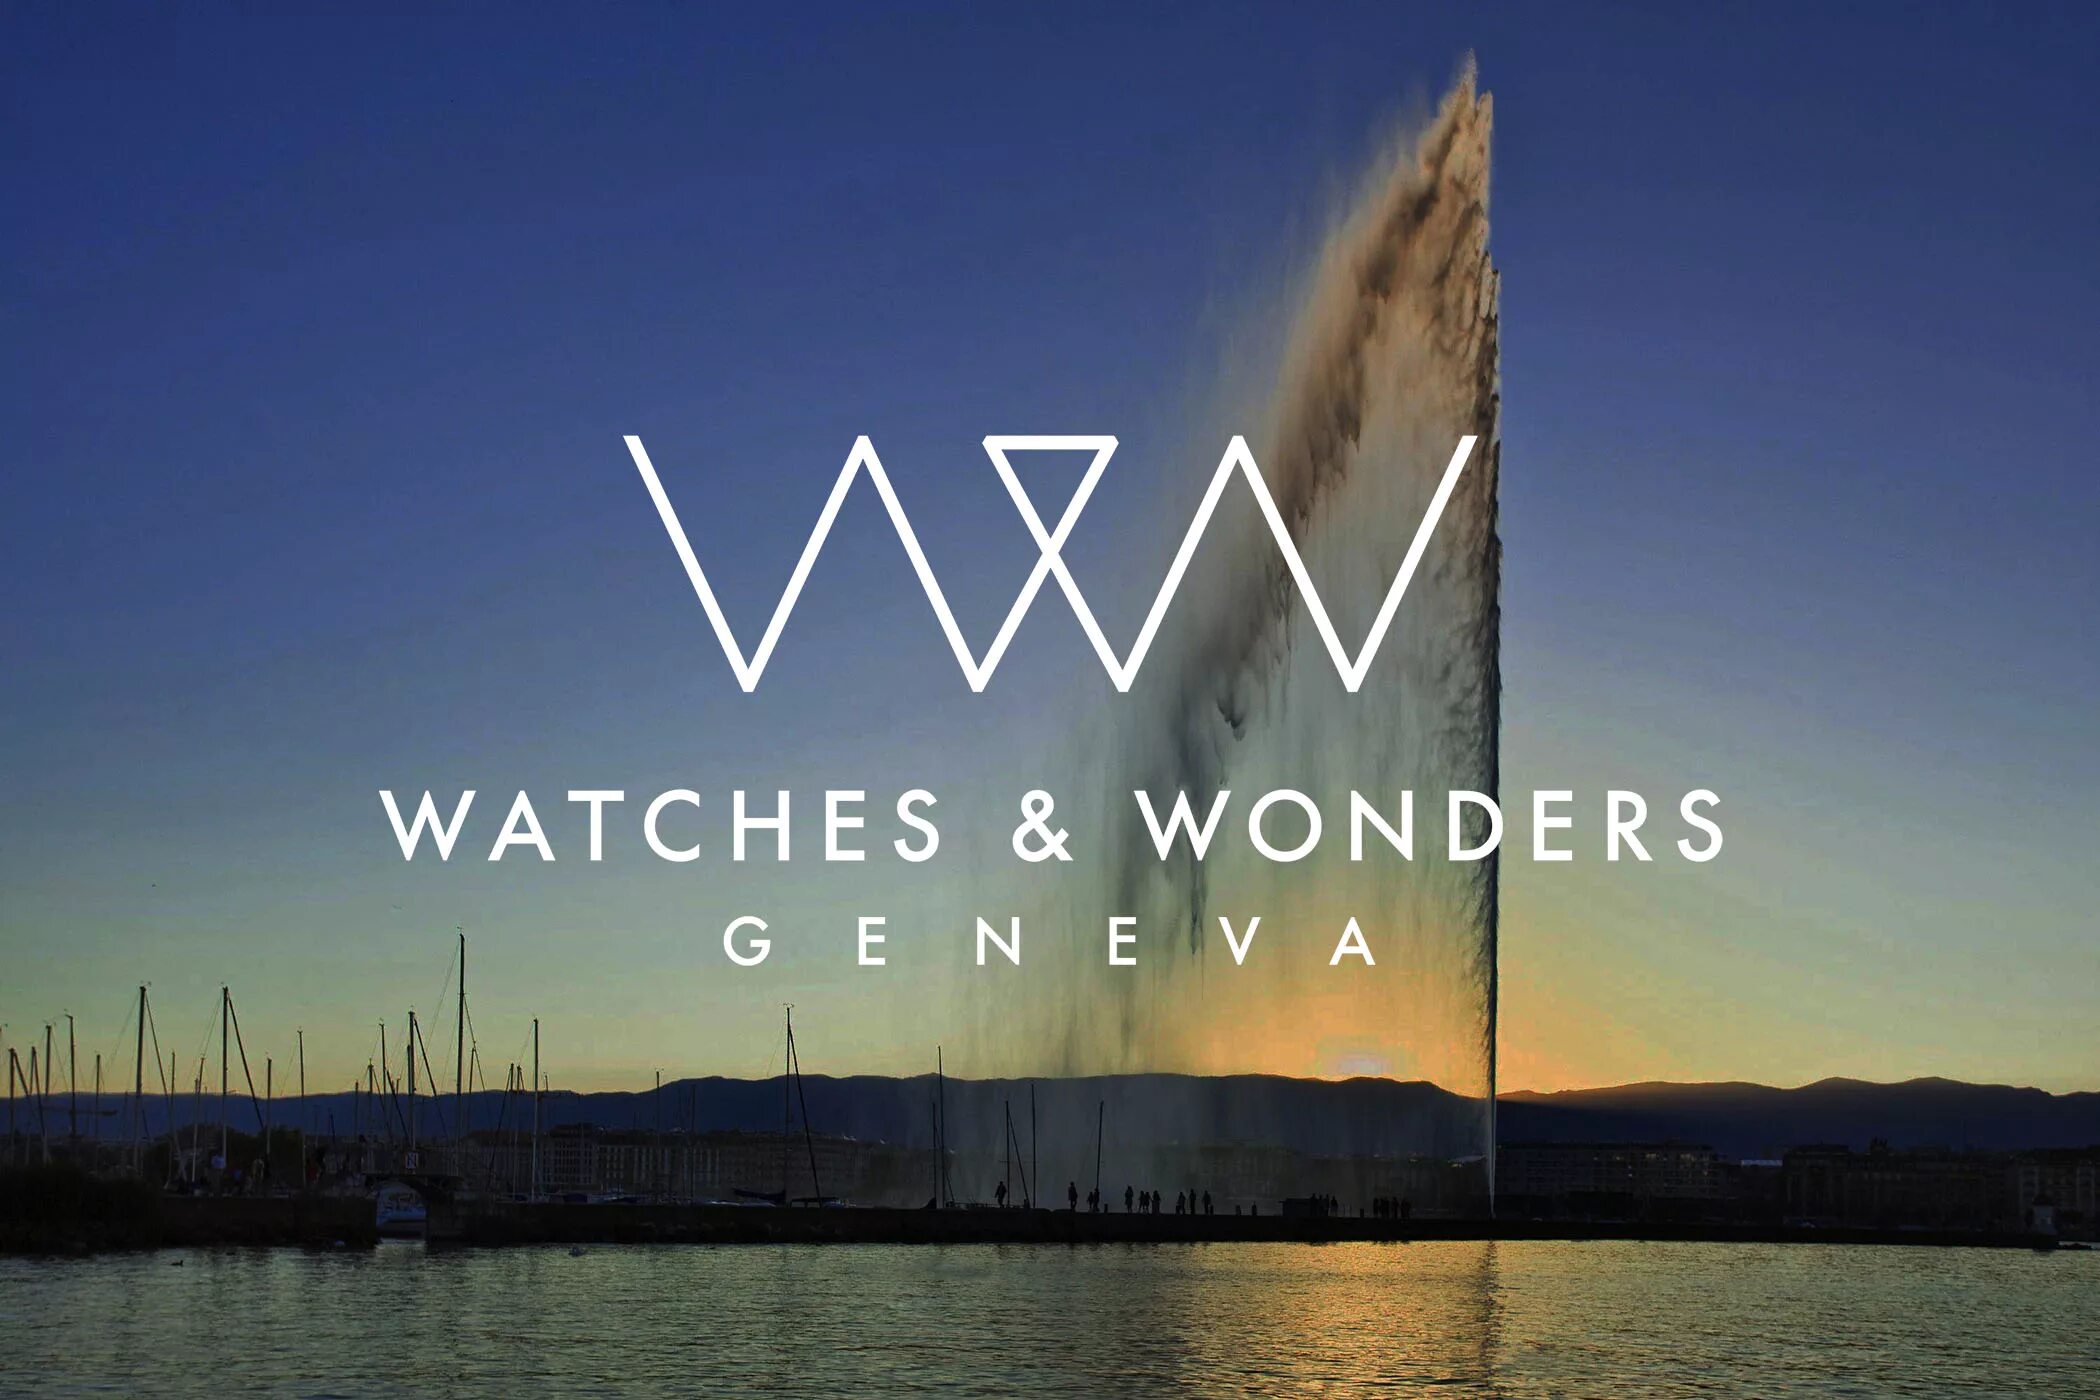 Watches and wonders